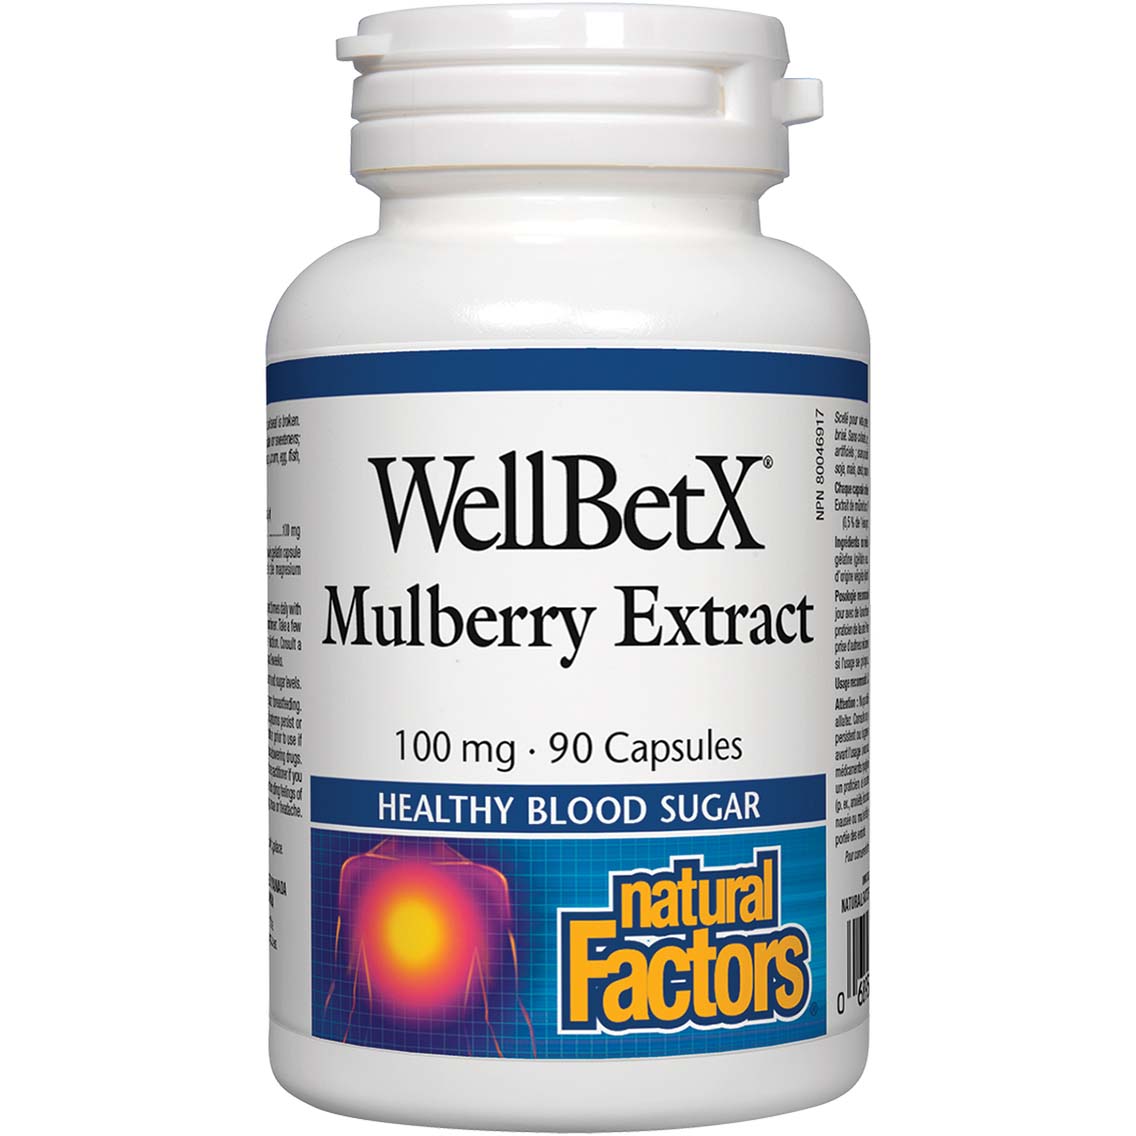 Natural Factors Wellbetx Mulberry Extract 90 Capsules 100 mg